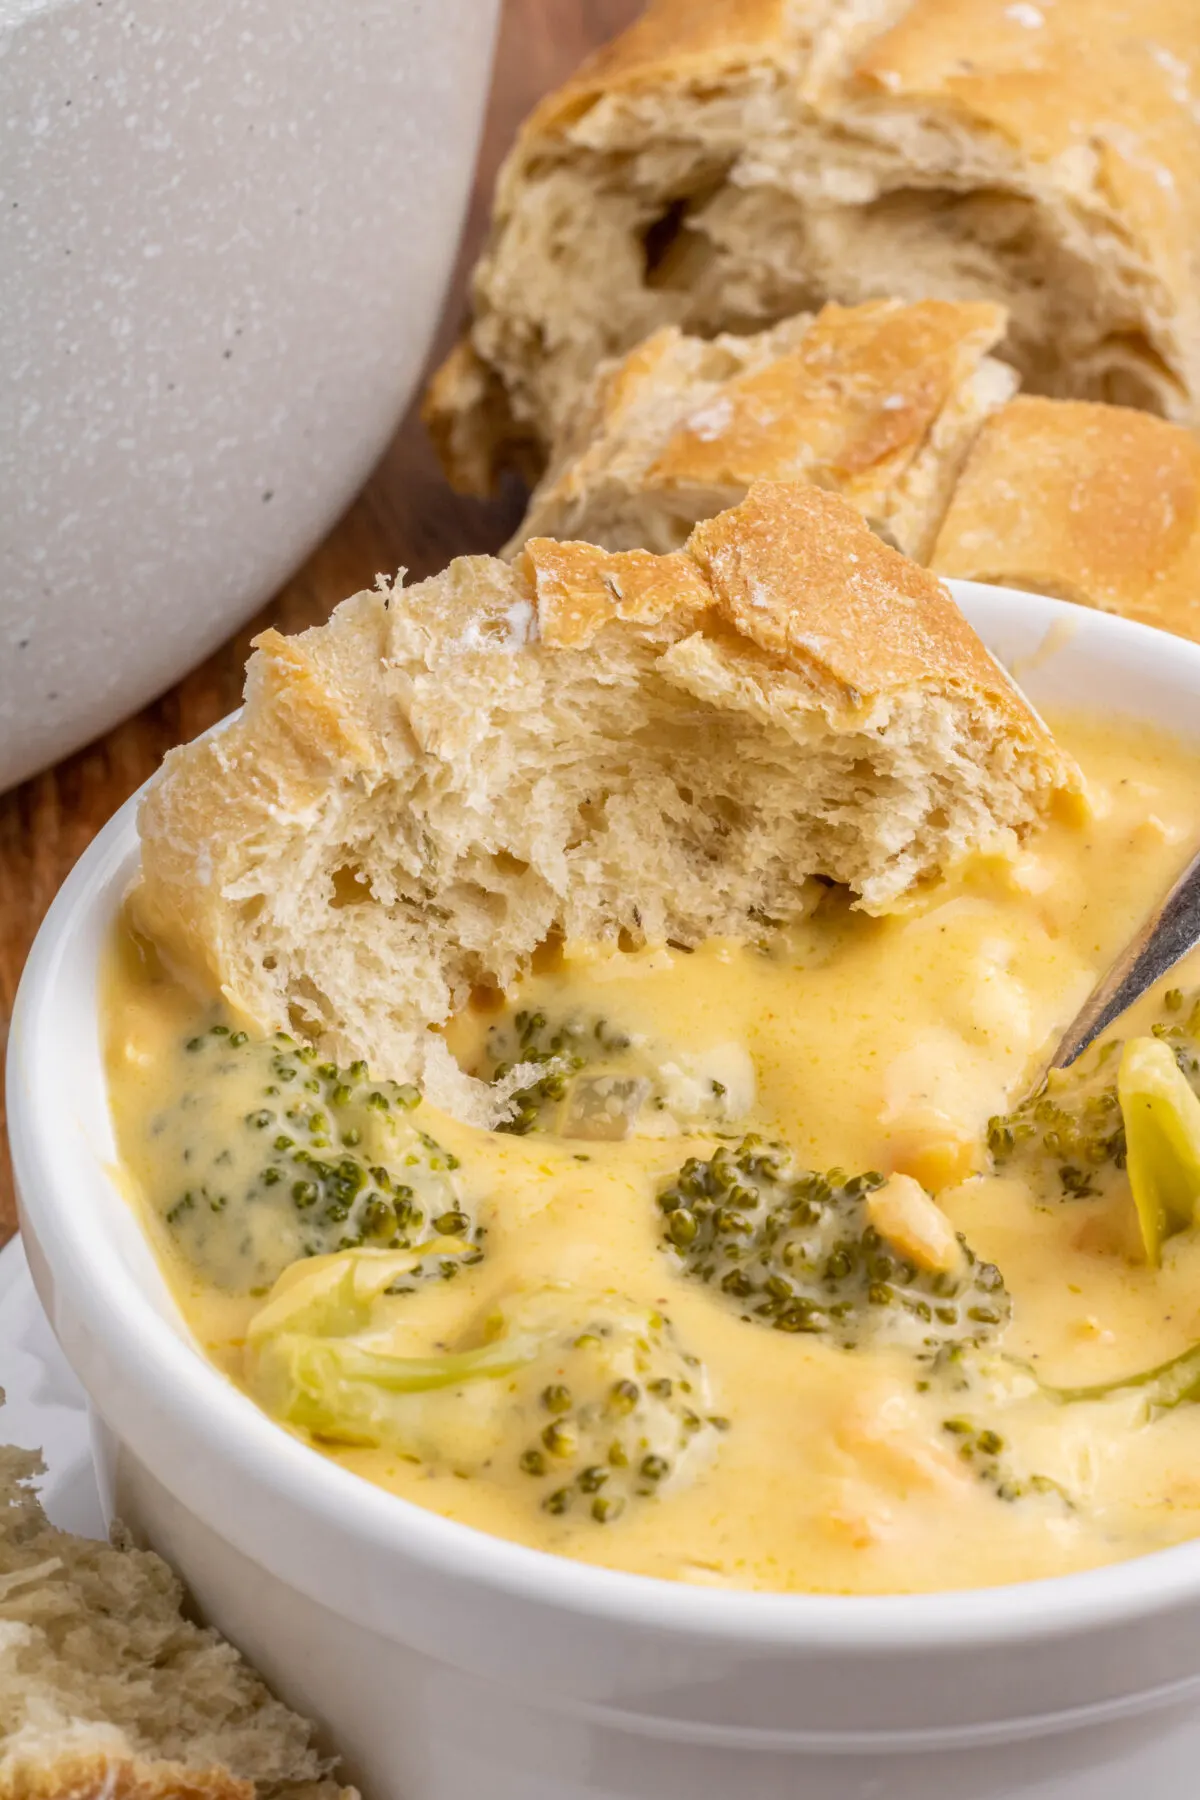 Craving soup? Get your pot ready and make the most delicious, comforting broccoli cheddar soup ever. It's easier than you think!